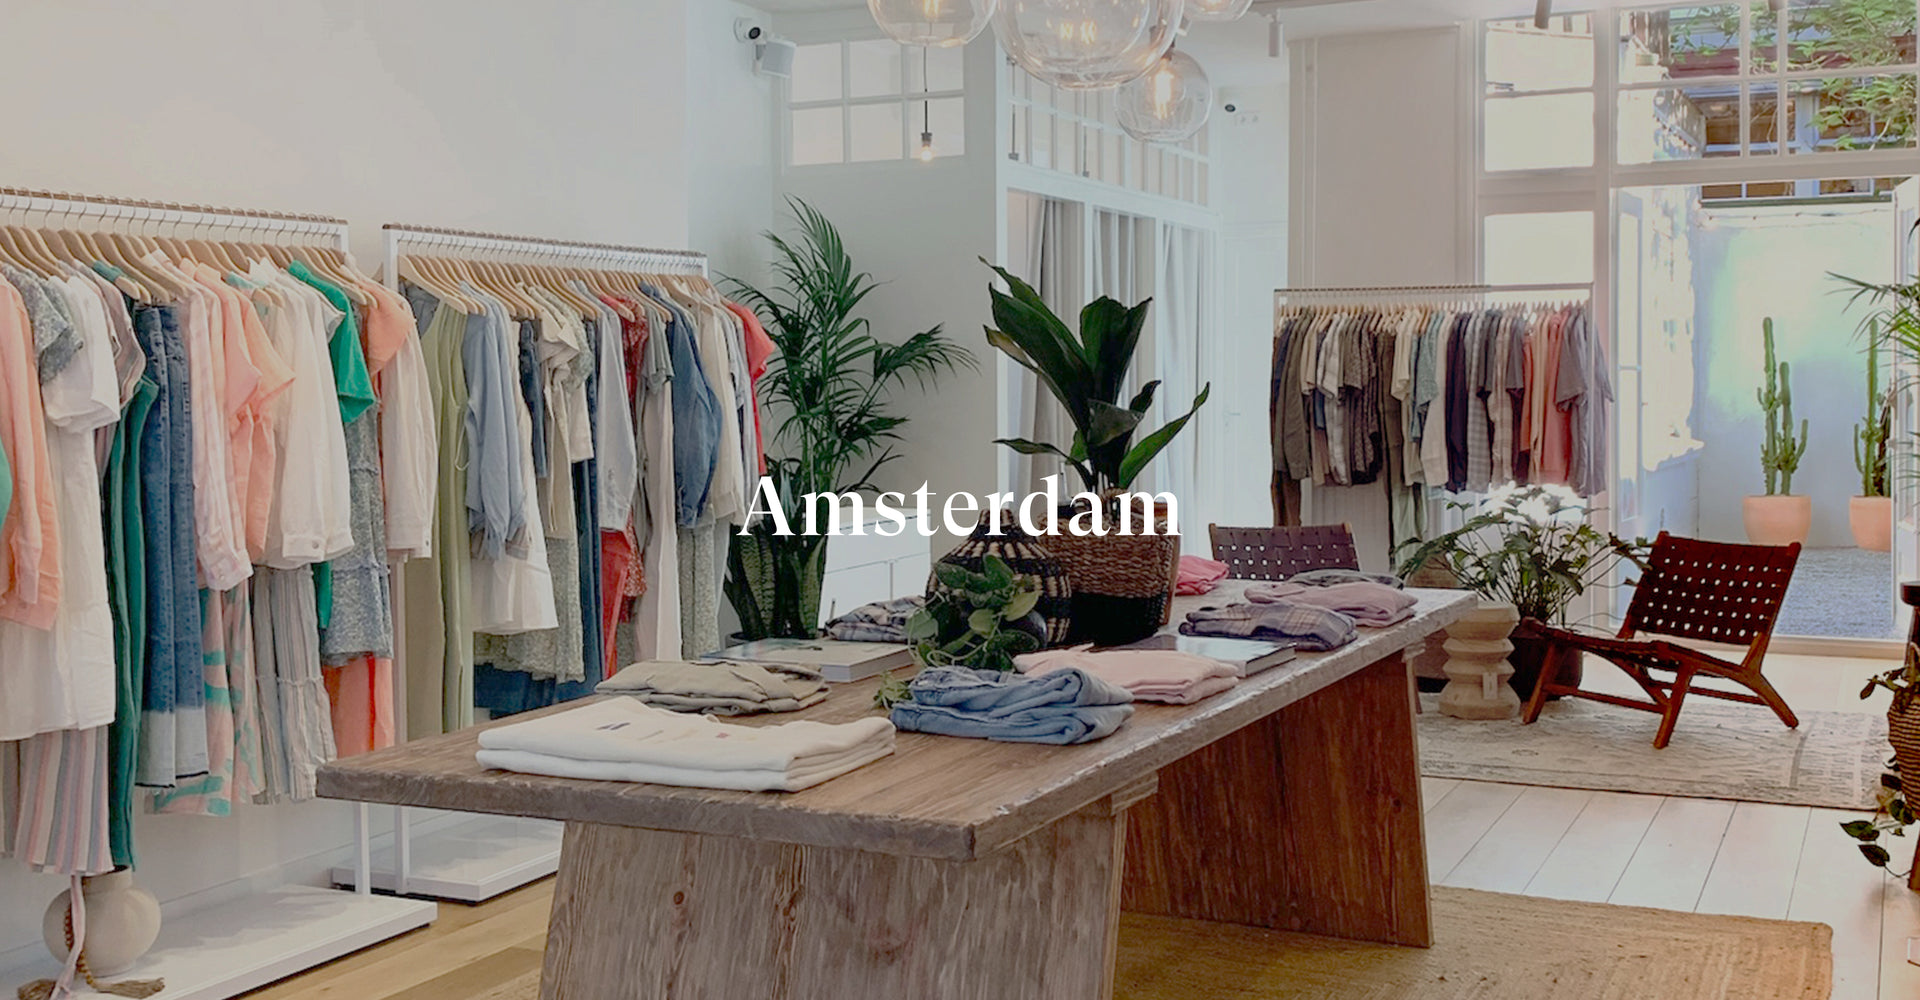 IMAGE SHOWS INSIDE OF AMSTERDAM STORE